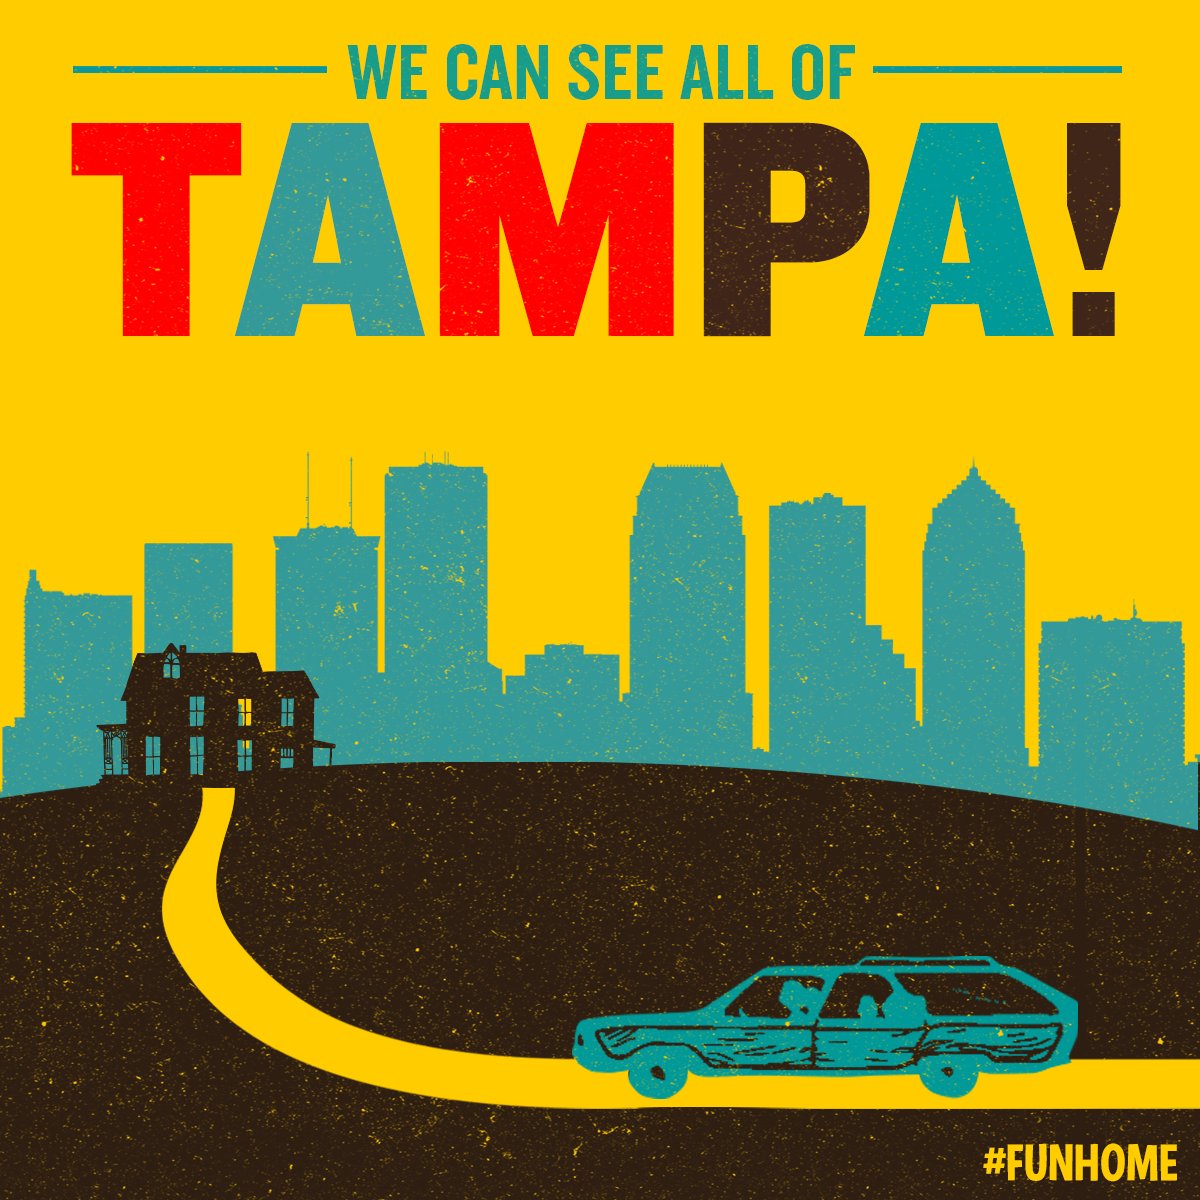 It's opening night at the @StrazCenter, and we can see all of TAMPA! Tickets: funho.me/2cfUKUR #FunHome